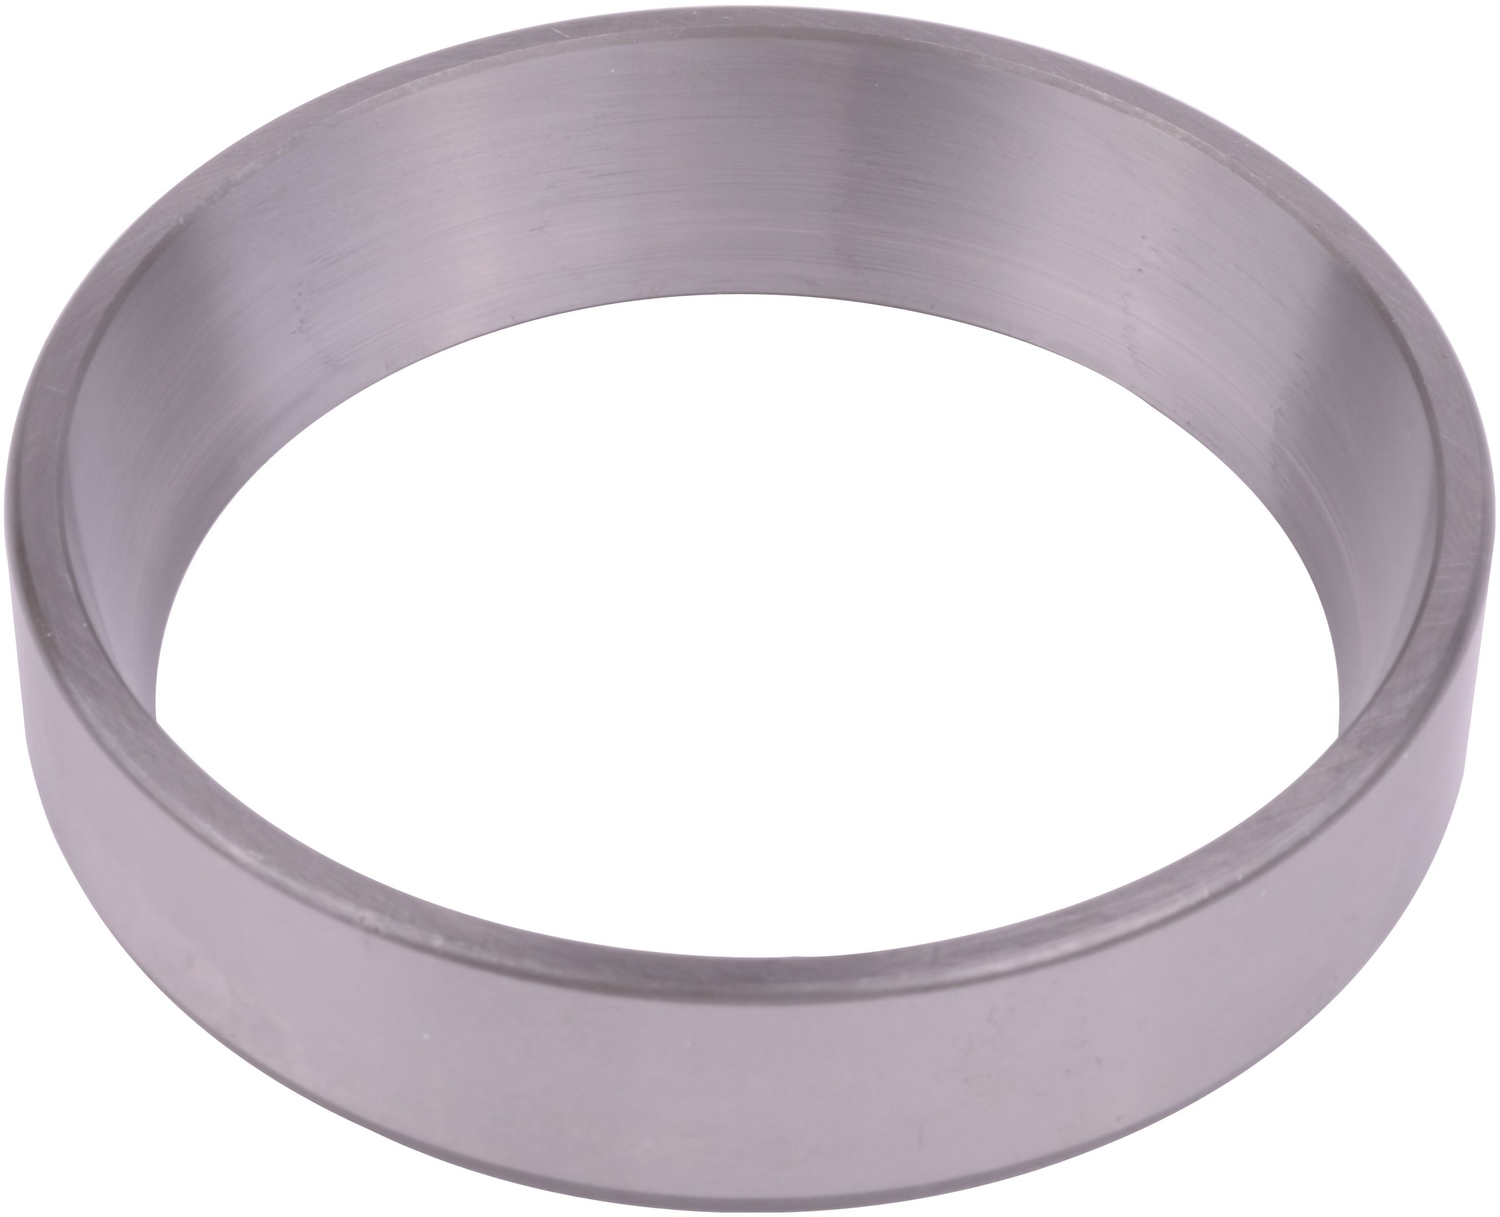 SKF (CHICAGO RAWHIDE) - Axle Differential Bearing Race - SKF LM48510 VP